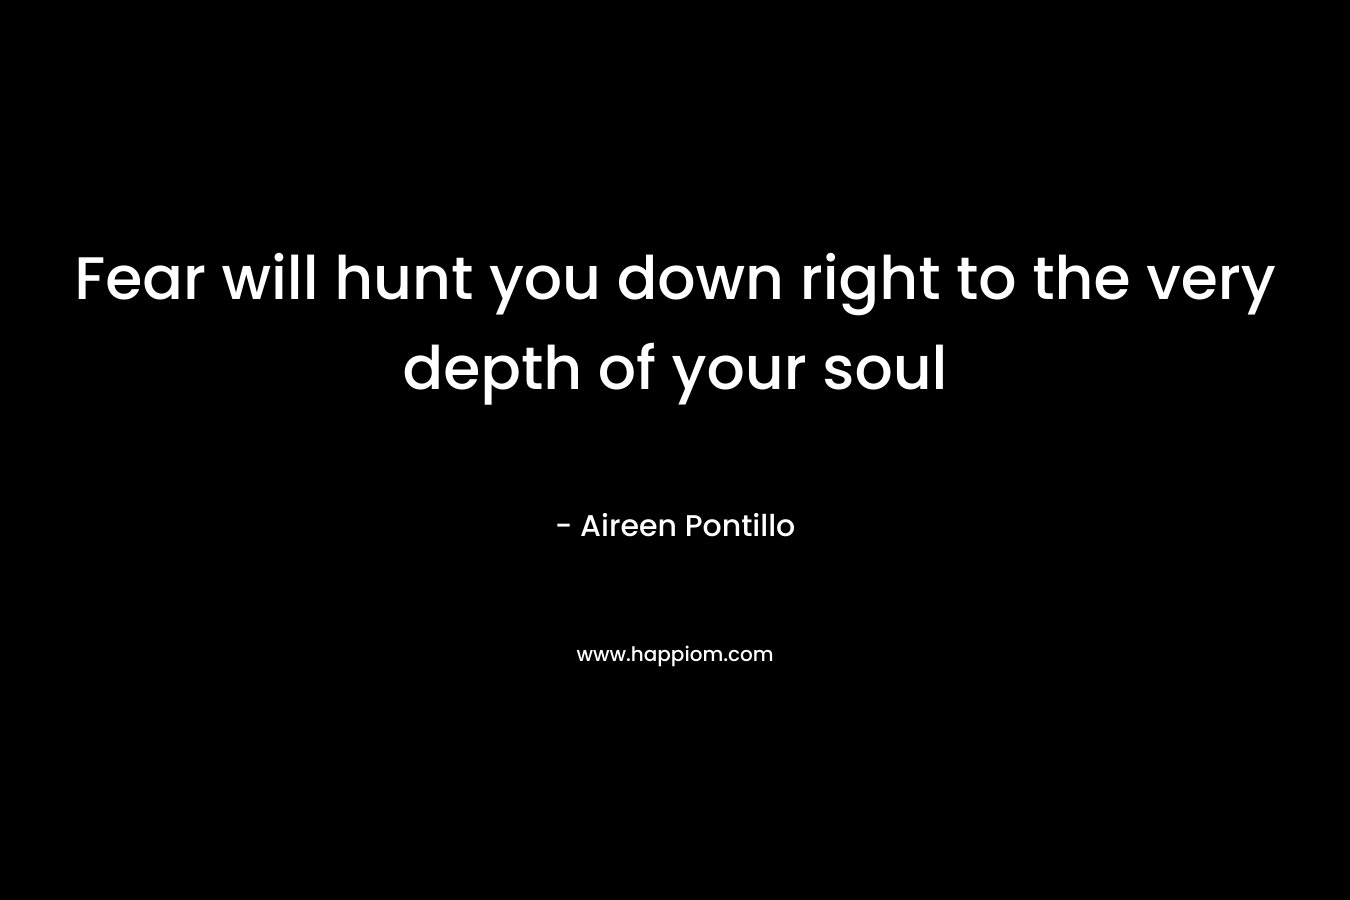 Fear will hunt you down right to the very depth of your soul